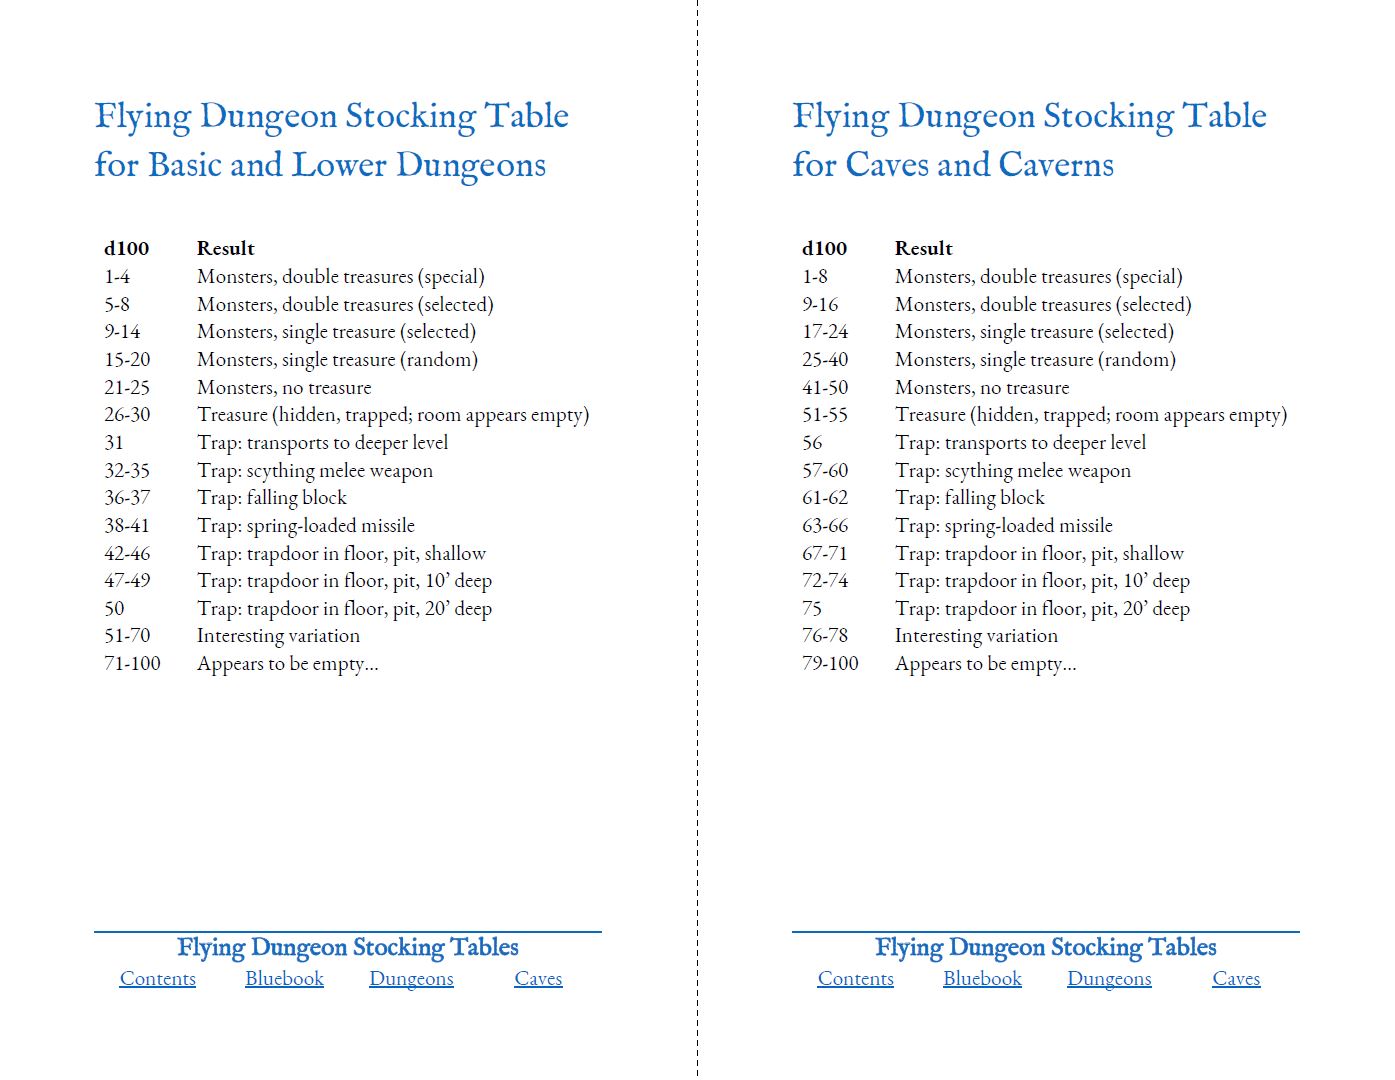 Flying Dungeon Stocking Tables for Print